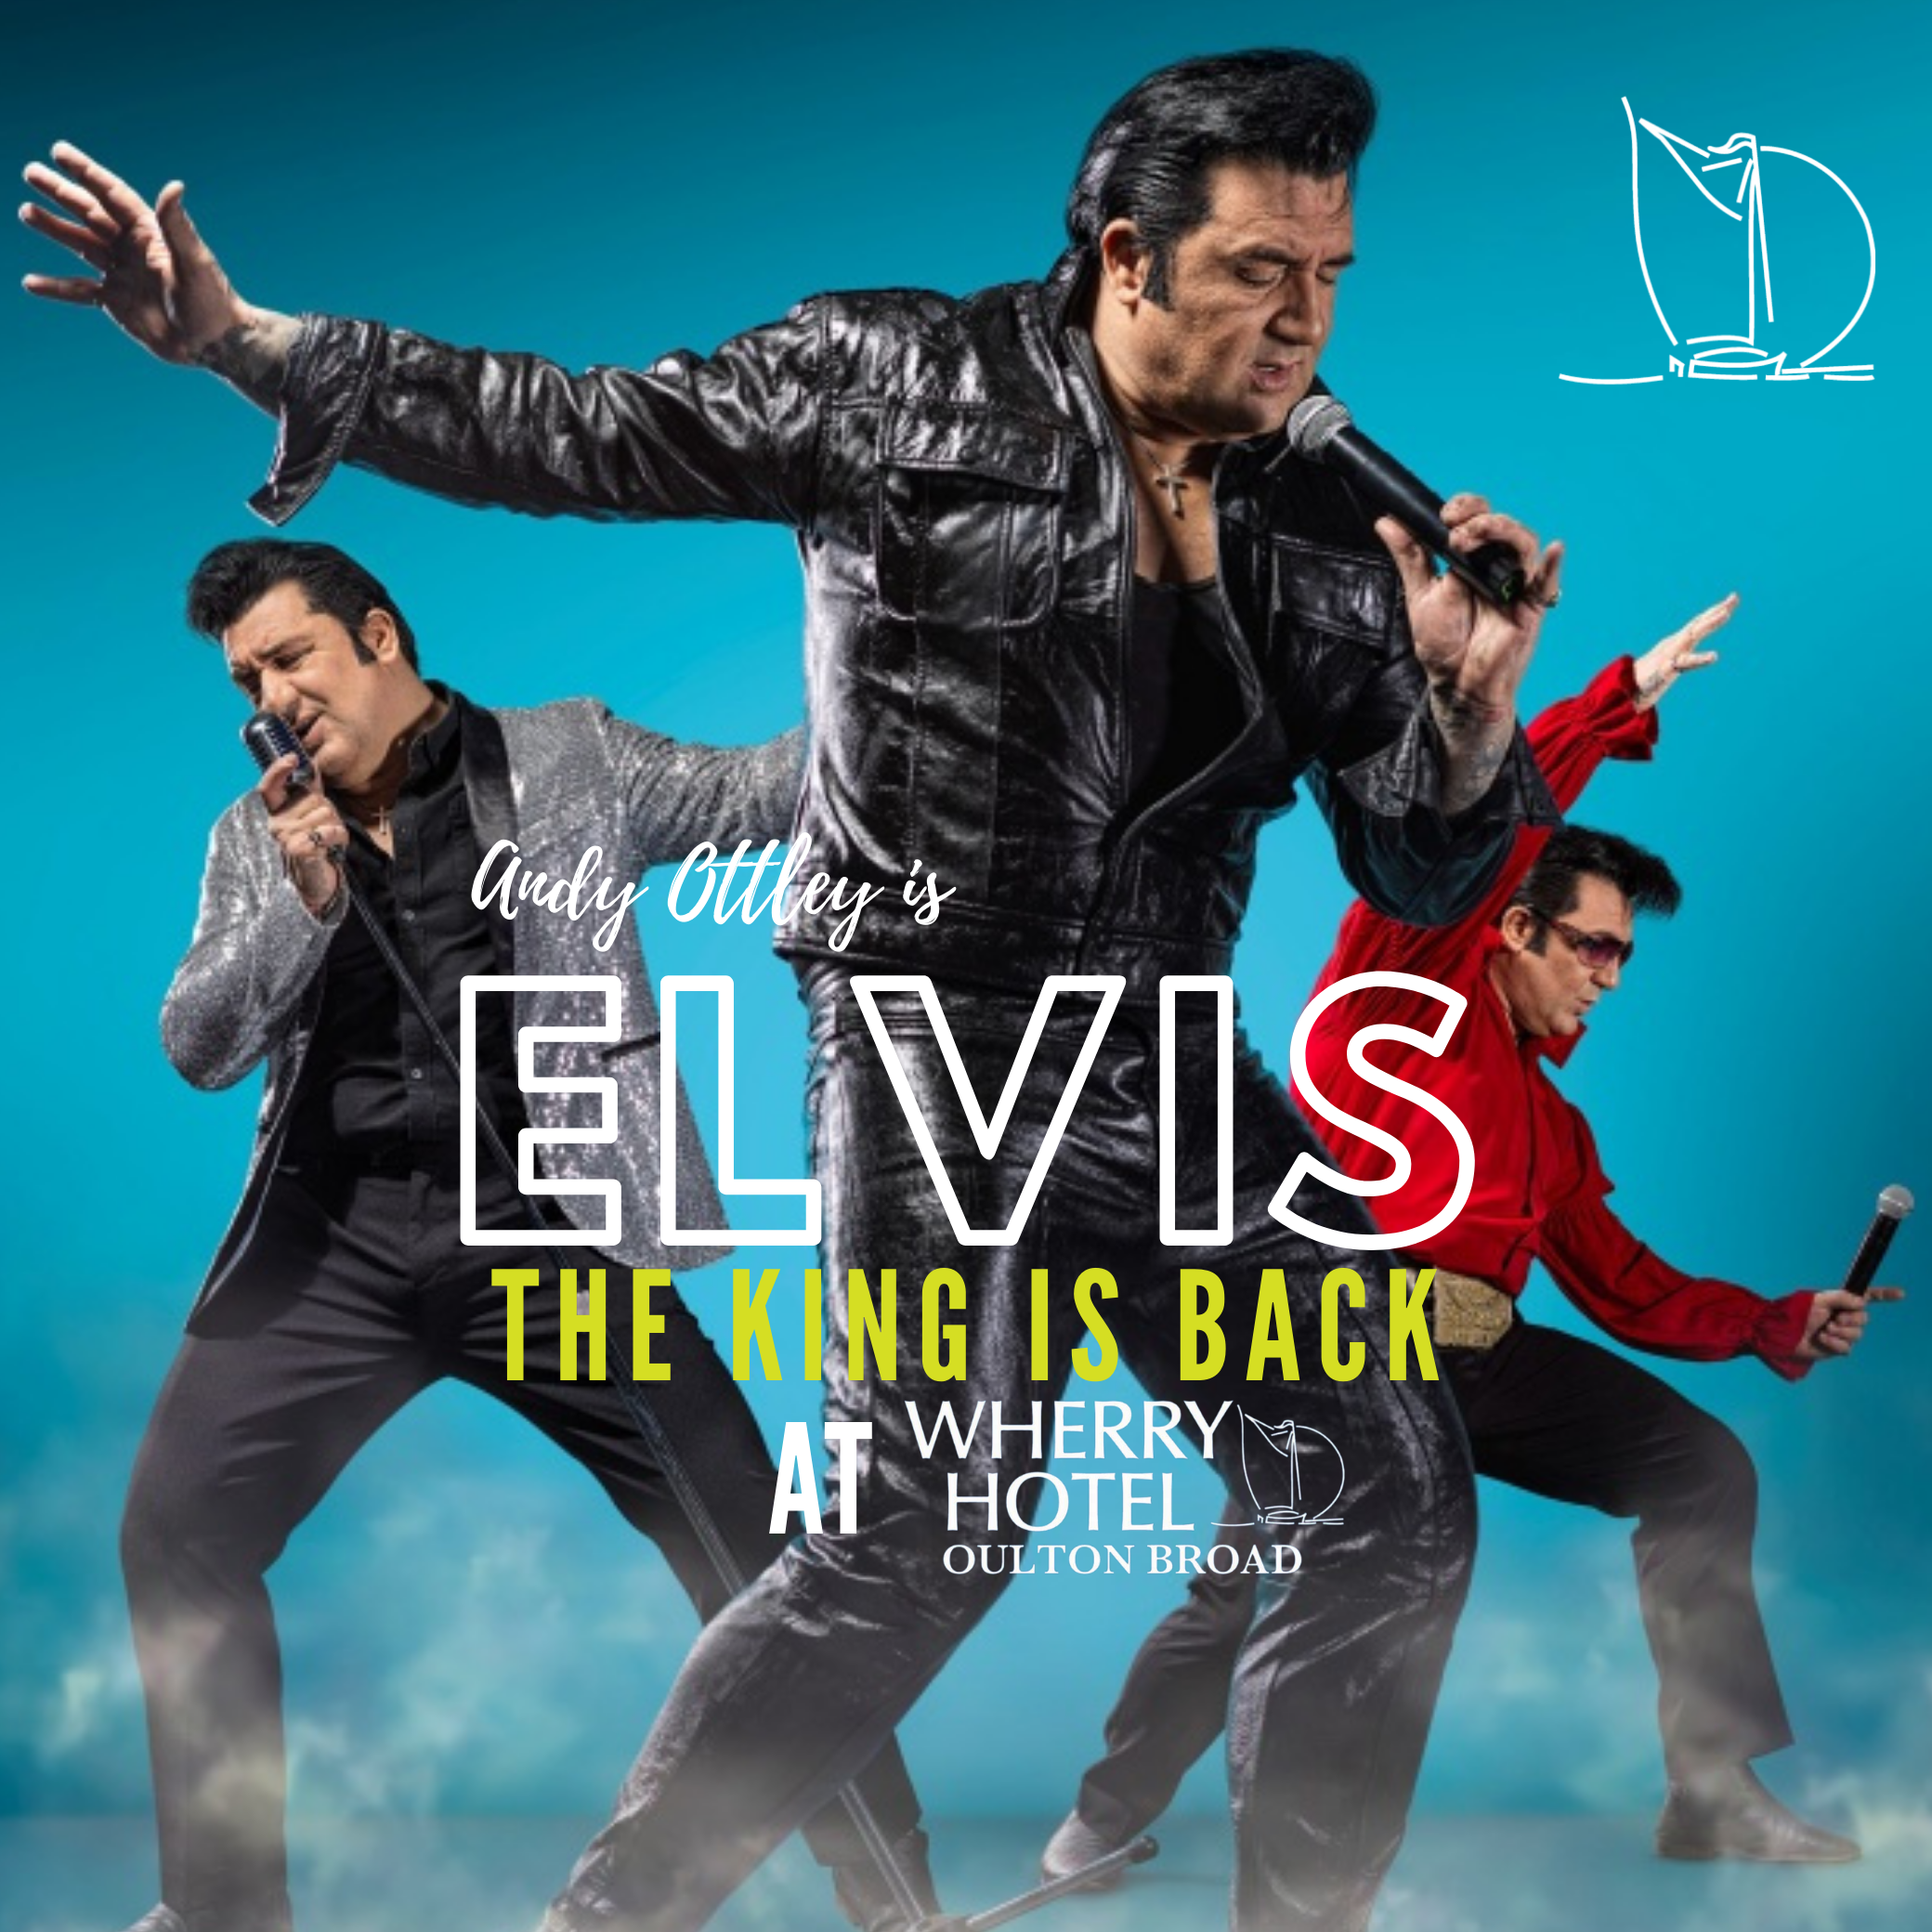 Join us for a Night of Elvis